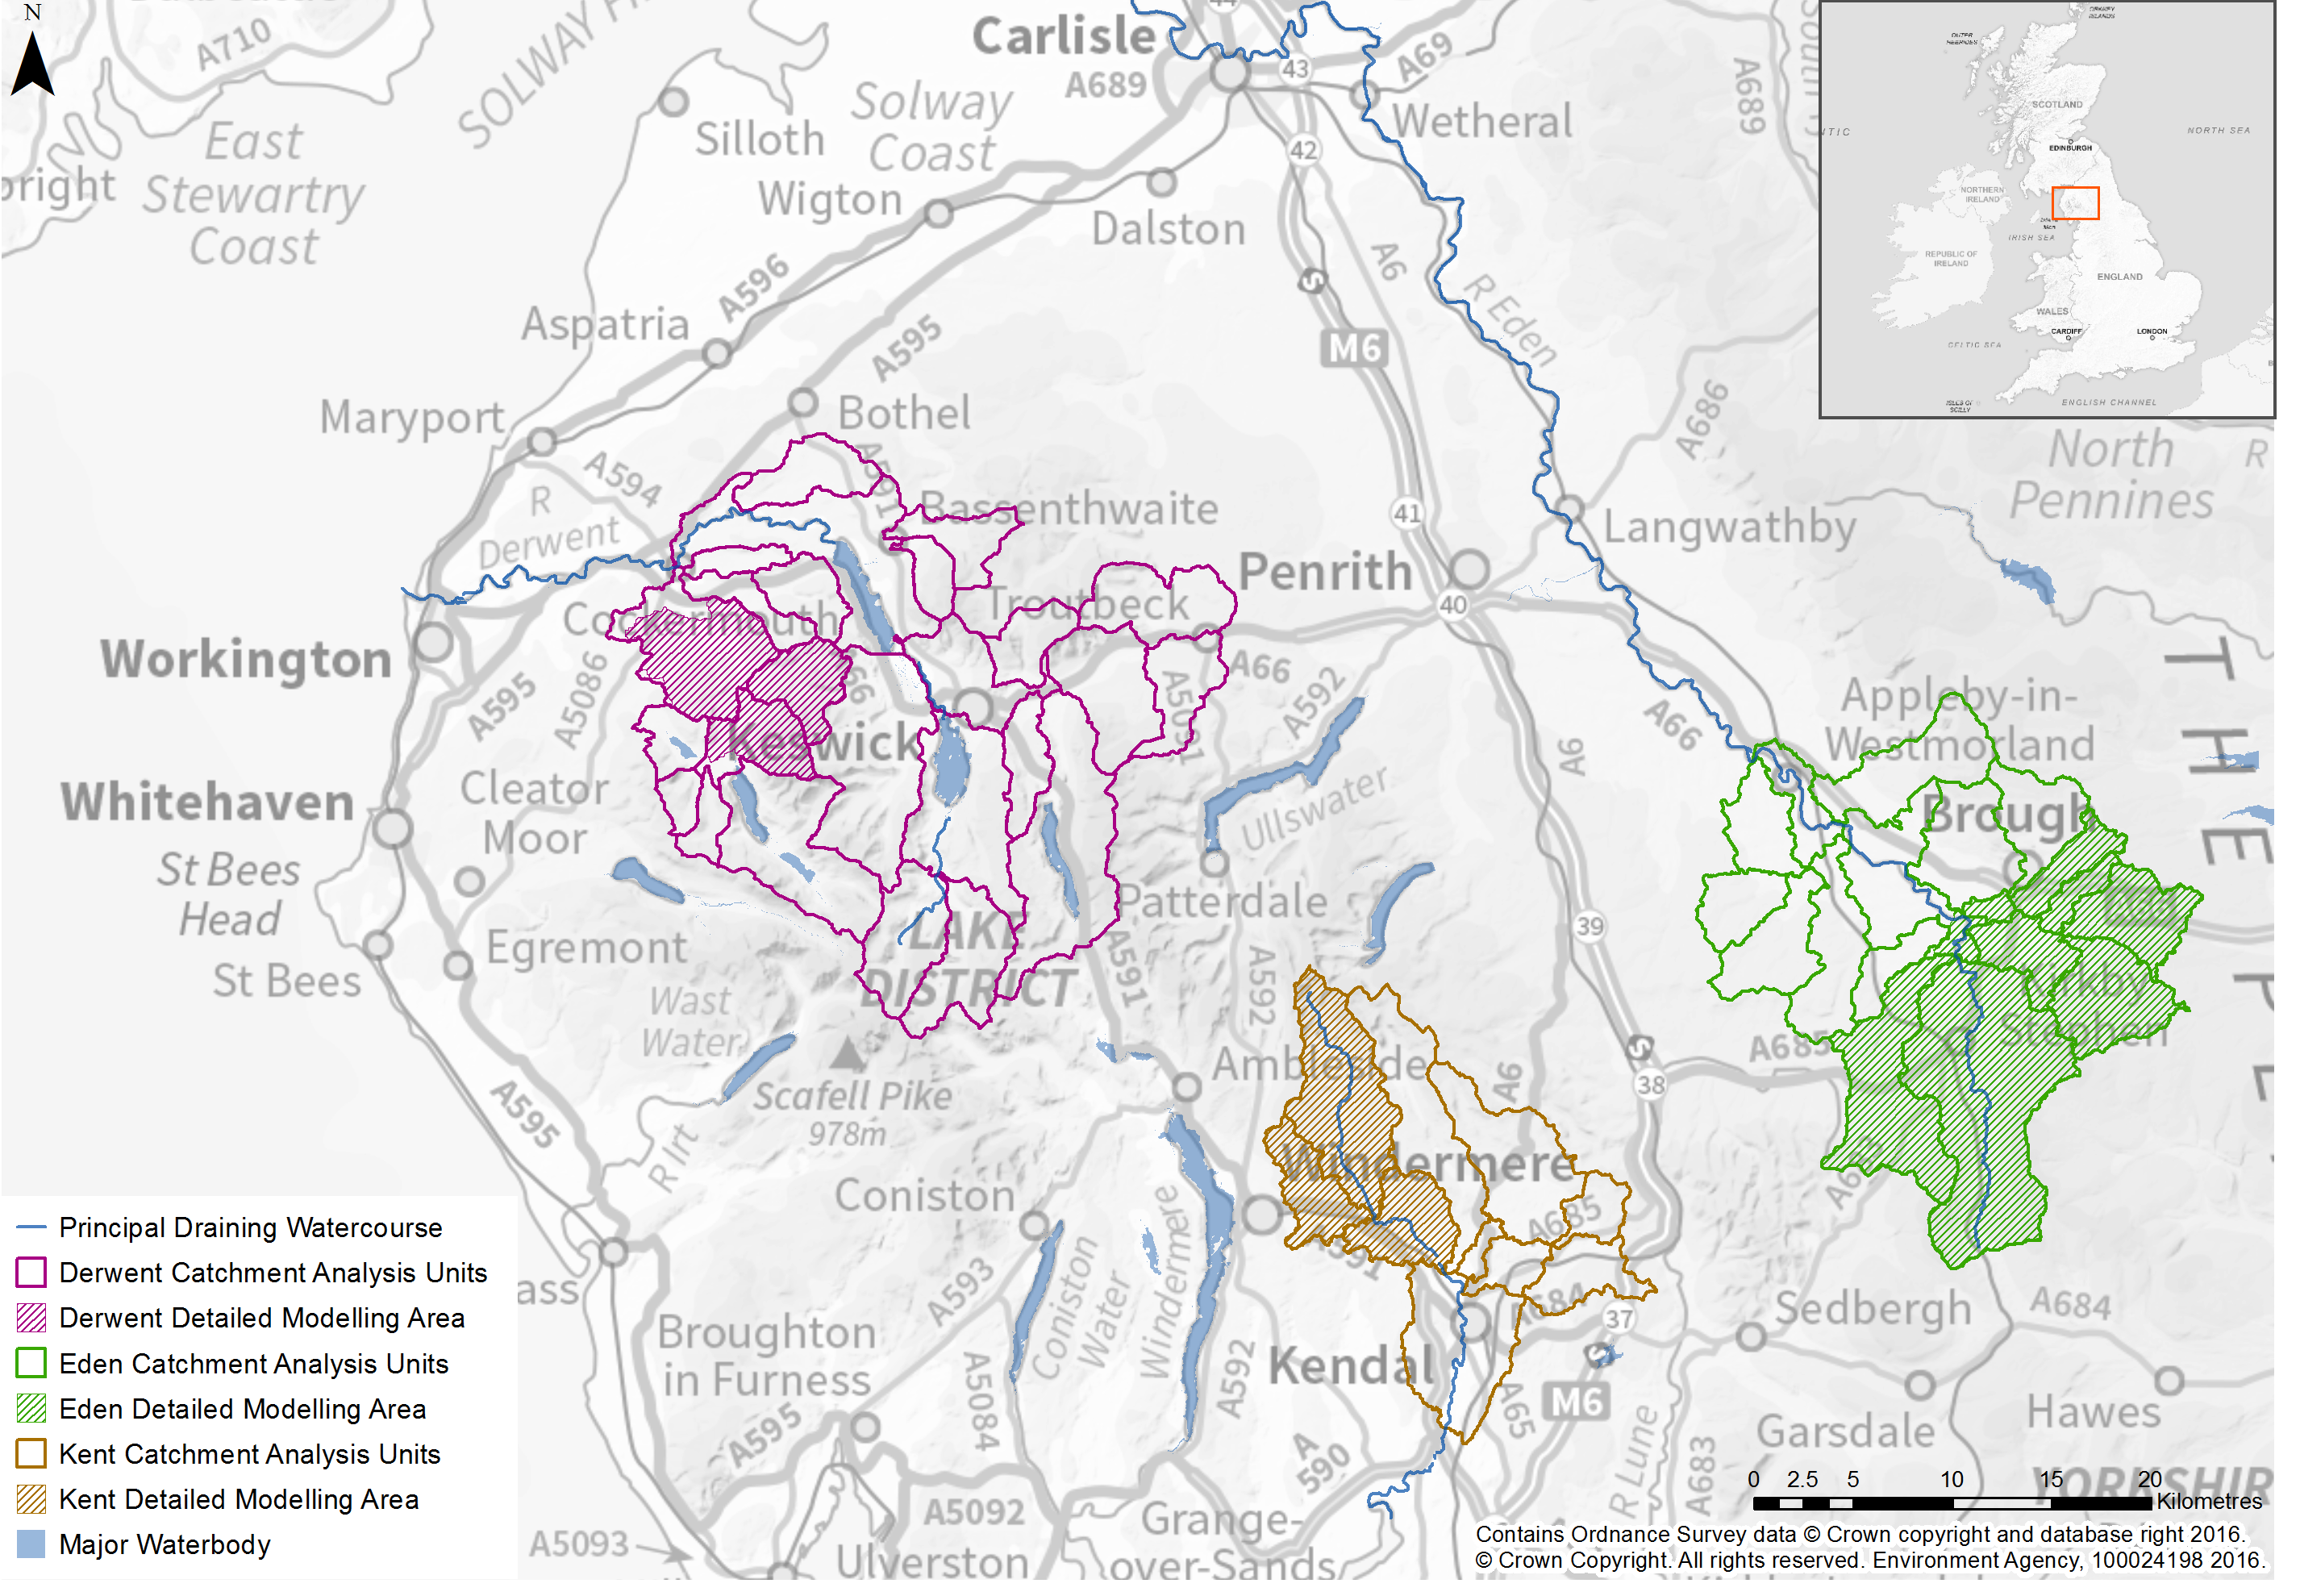 NFM modelling in Derwent, Eden and Kent catchments